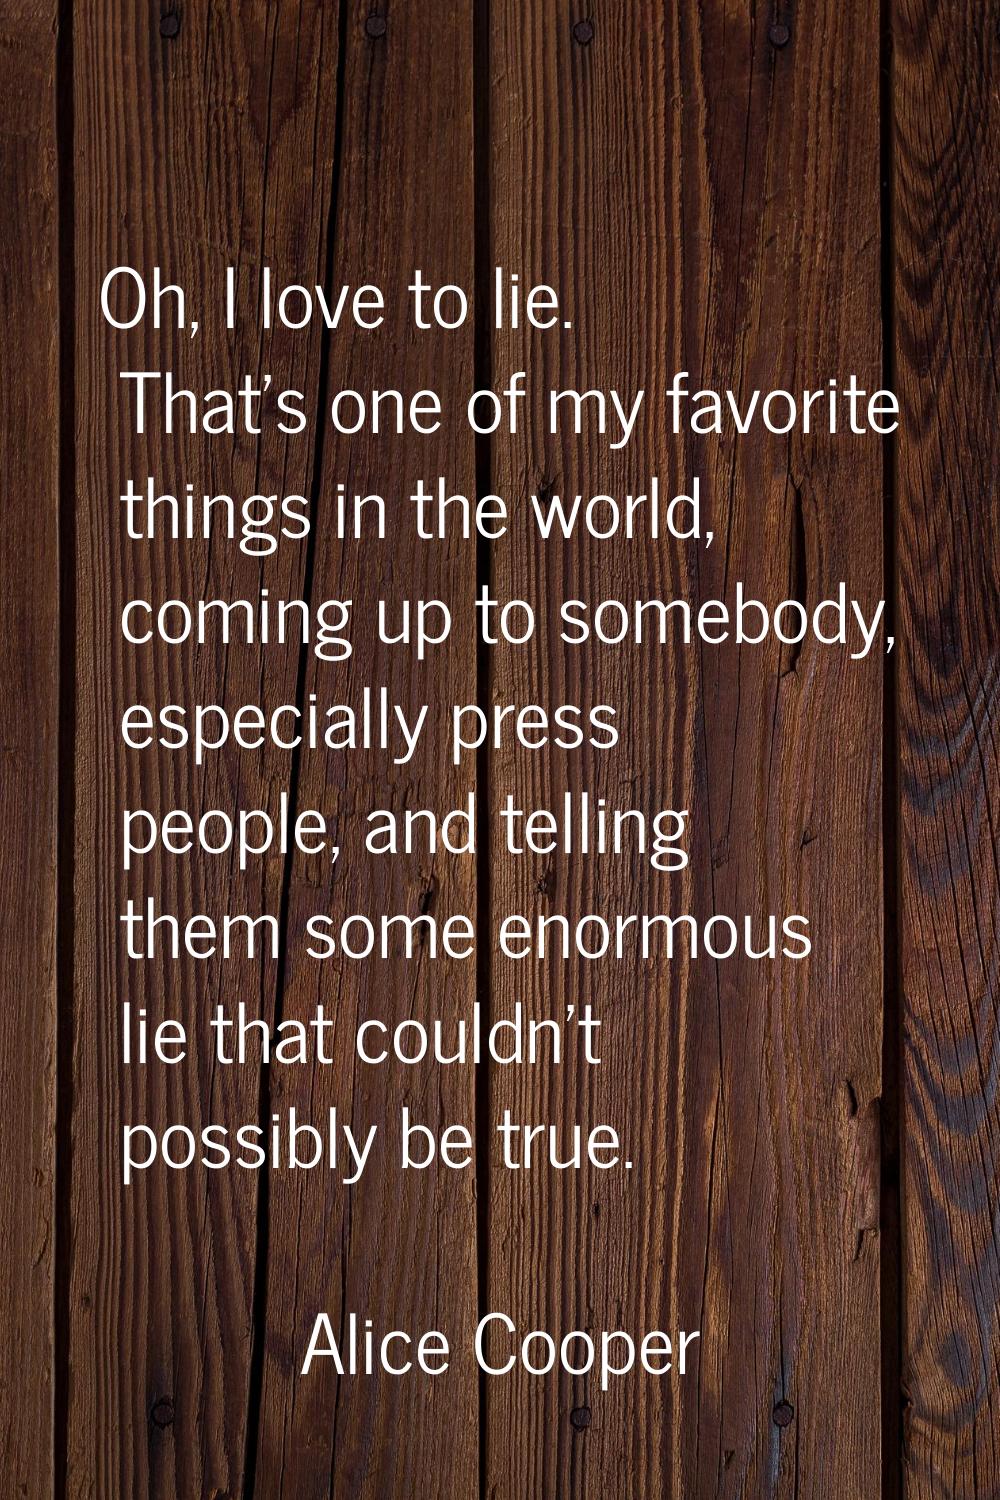 Oh, I love to lie. That's one of my favorite things in the world, coming up to somebody, especially